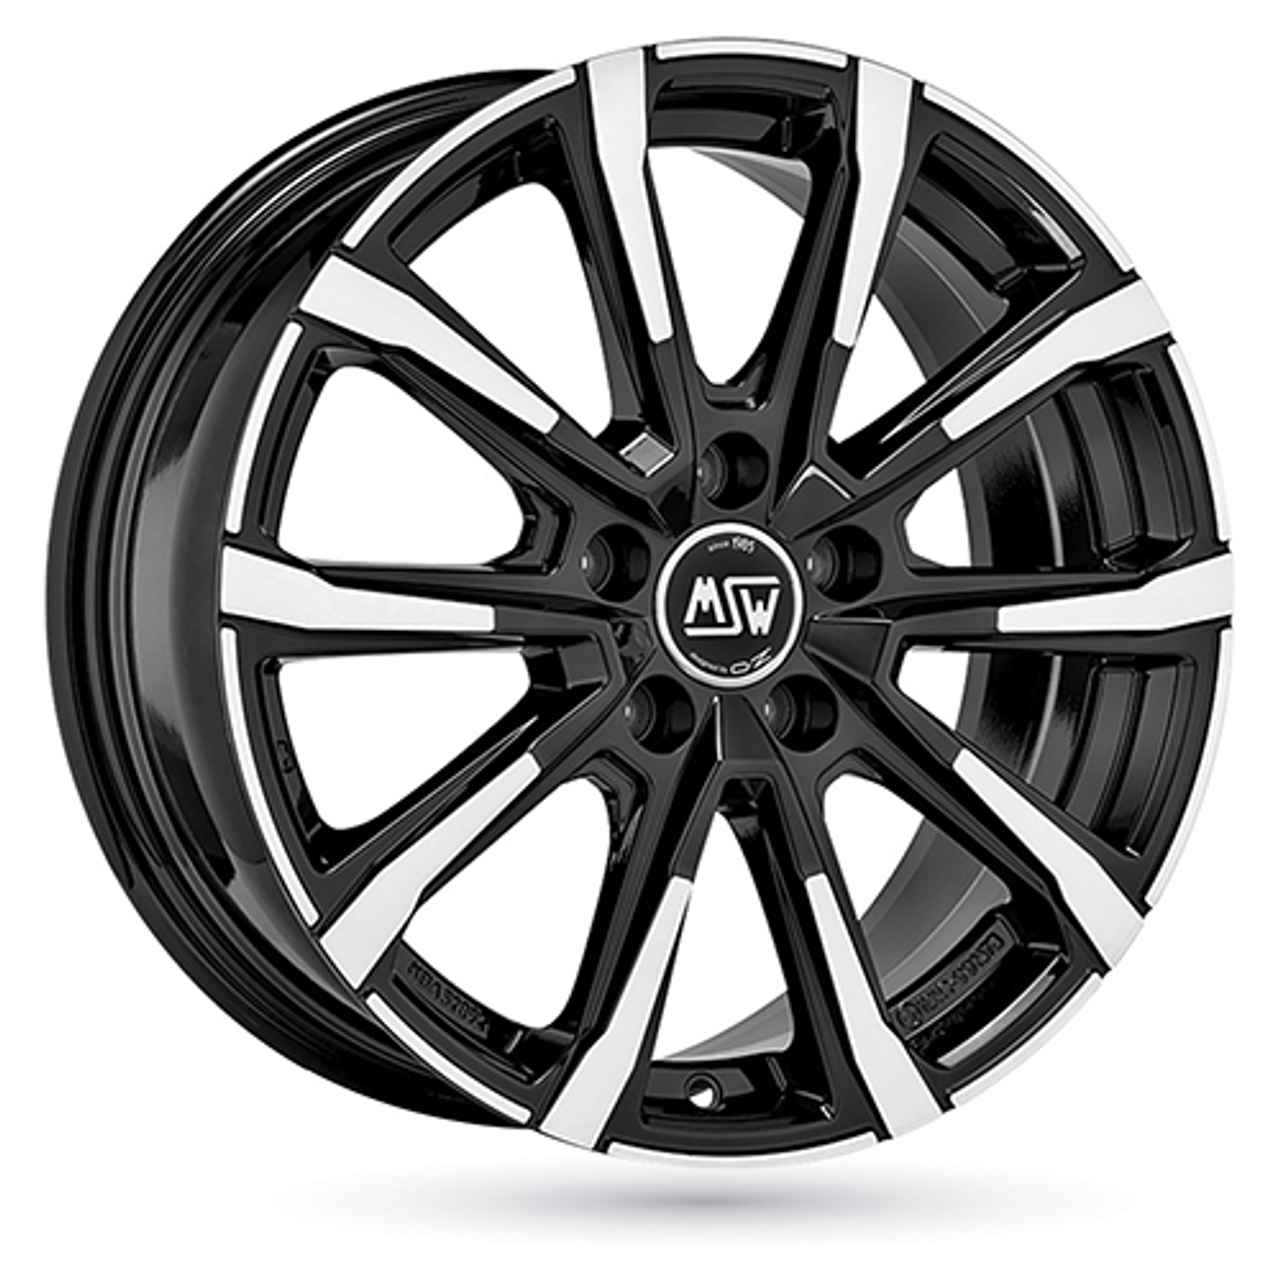 MSW (OZ) MSW 79 gloss black full polished 7.5Jx18 5x114.3 ET49